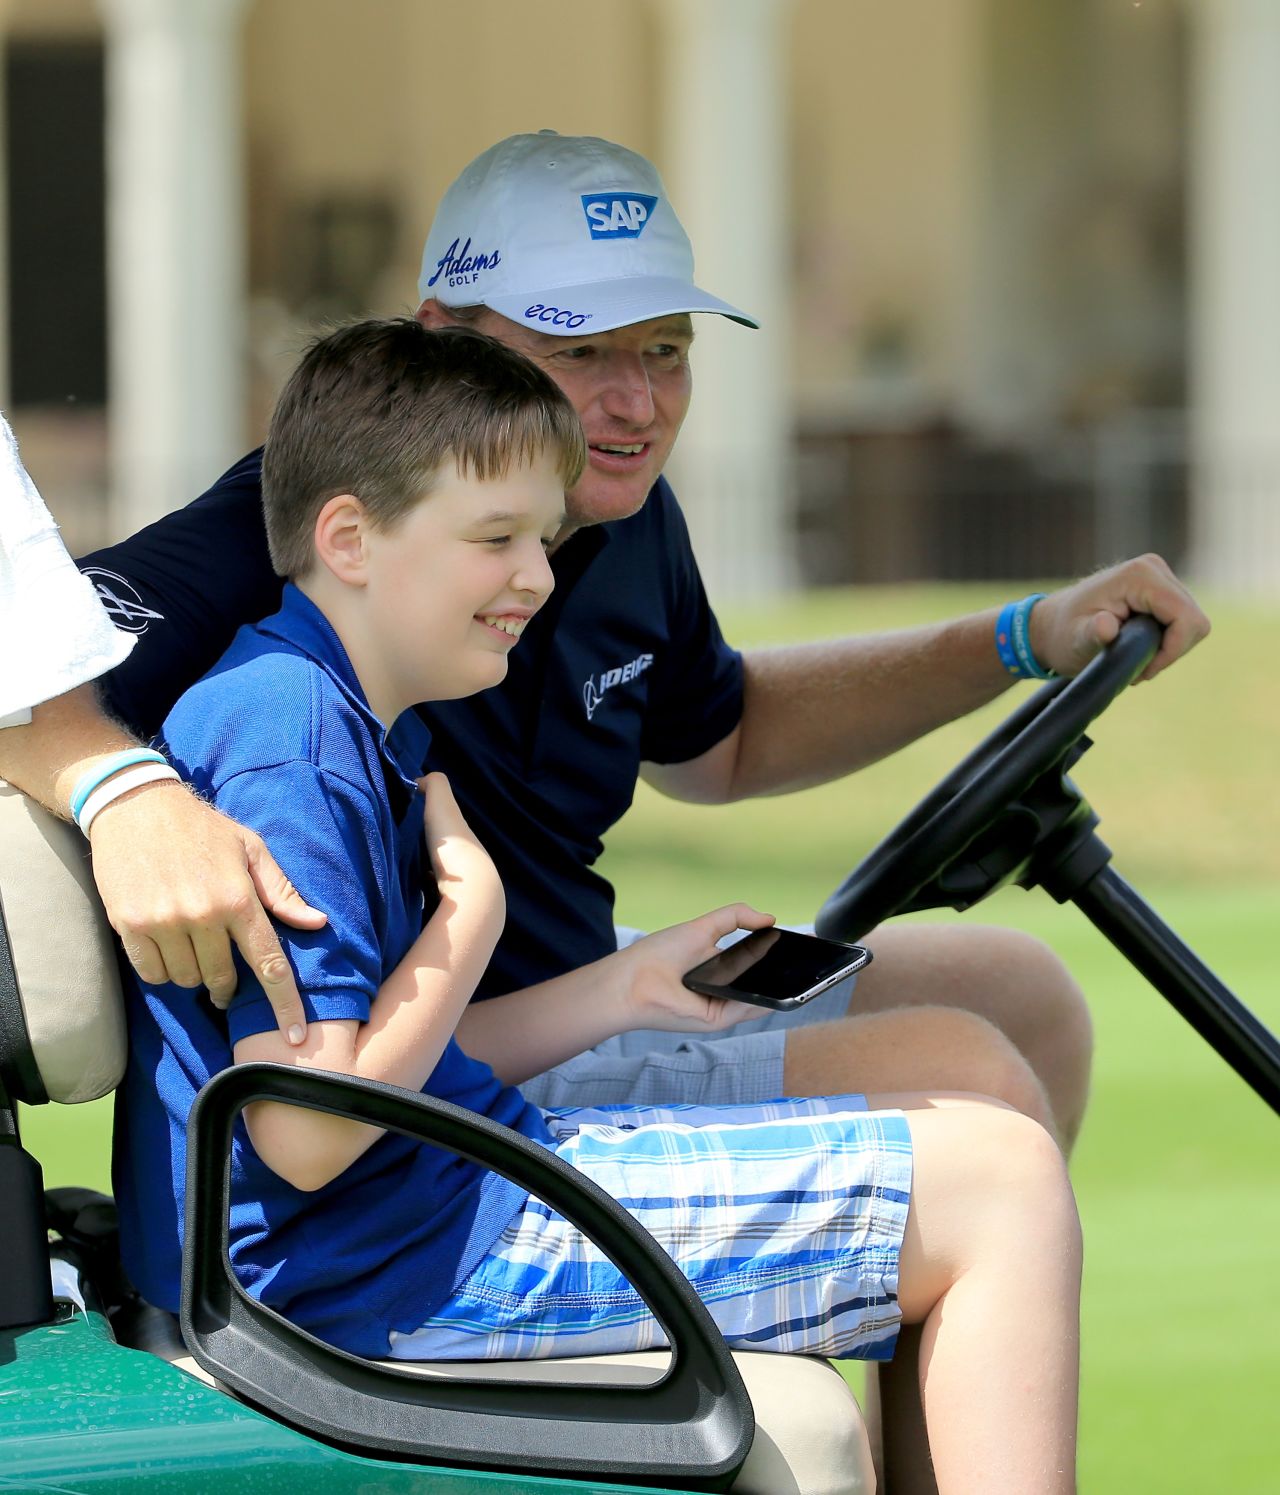 Veteran golf star Ernie Els is a longtime campaigner for autism awareness. His son Ben was diagnosed at an early age.